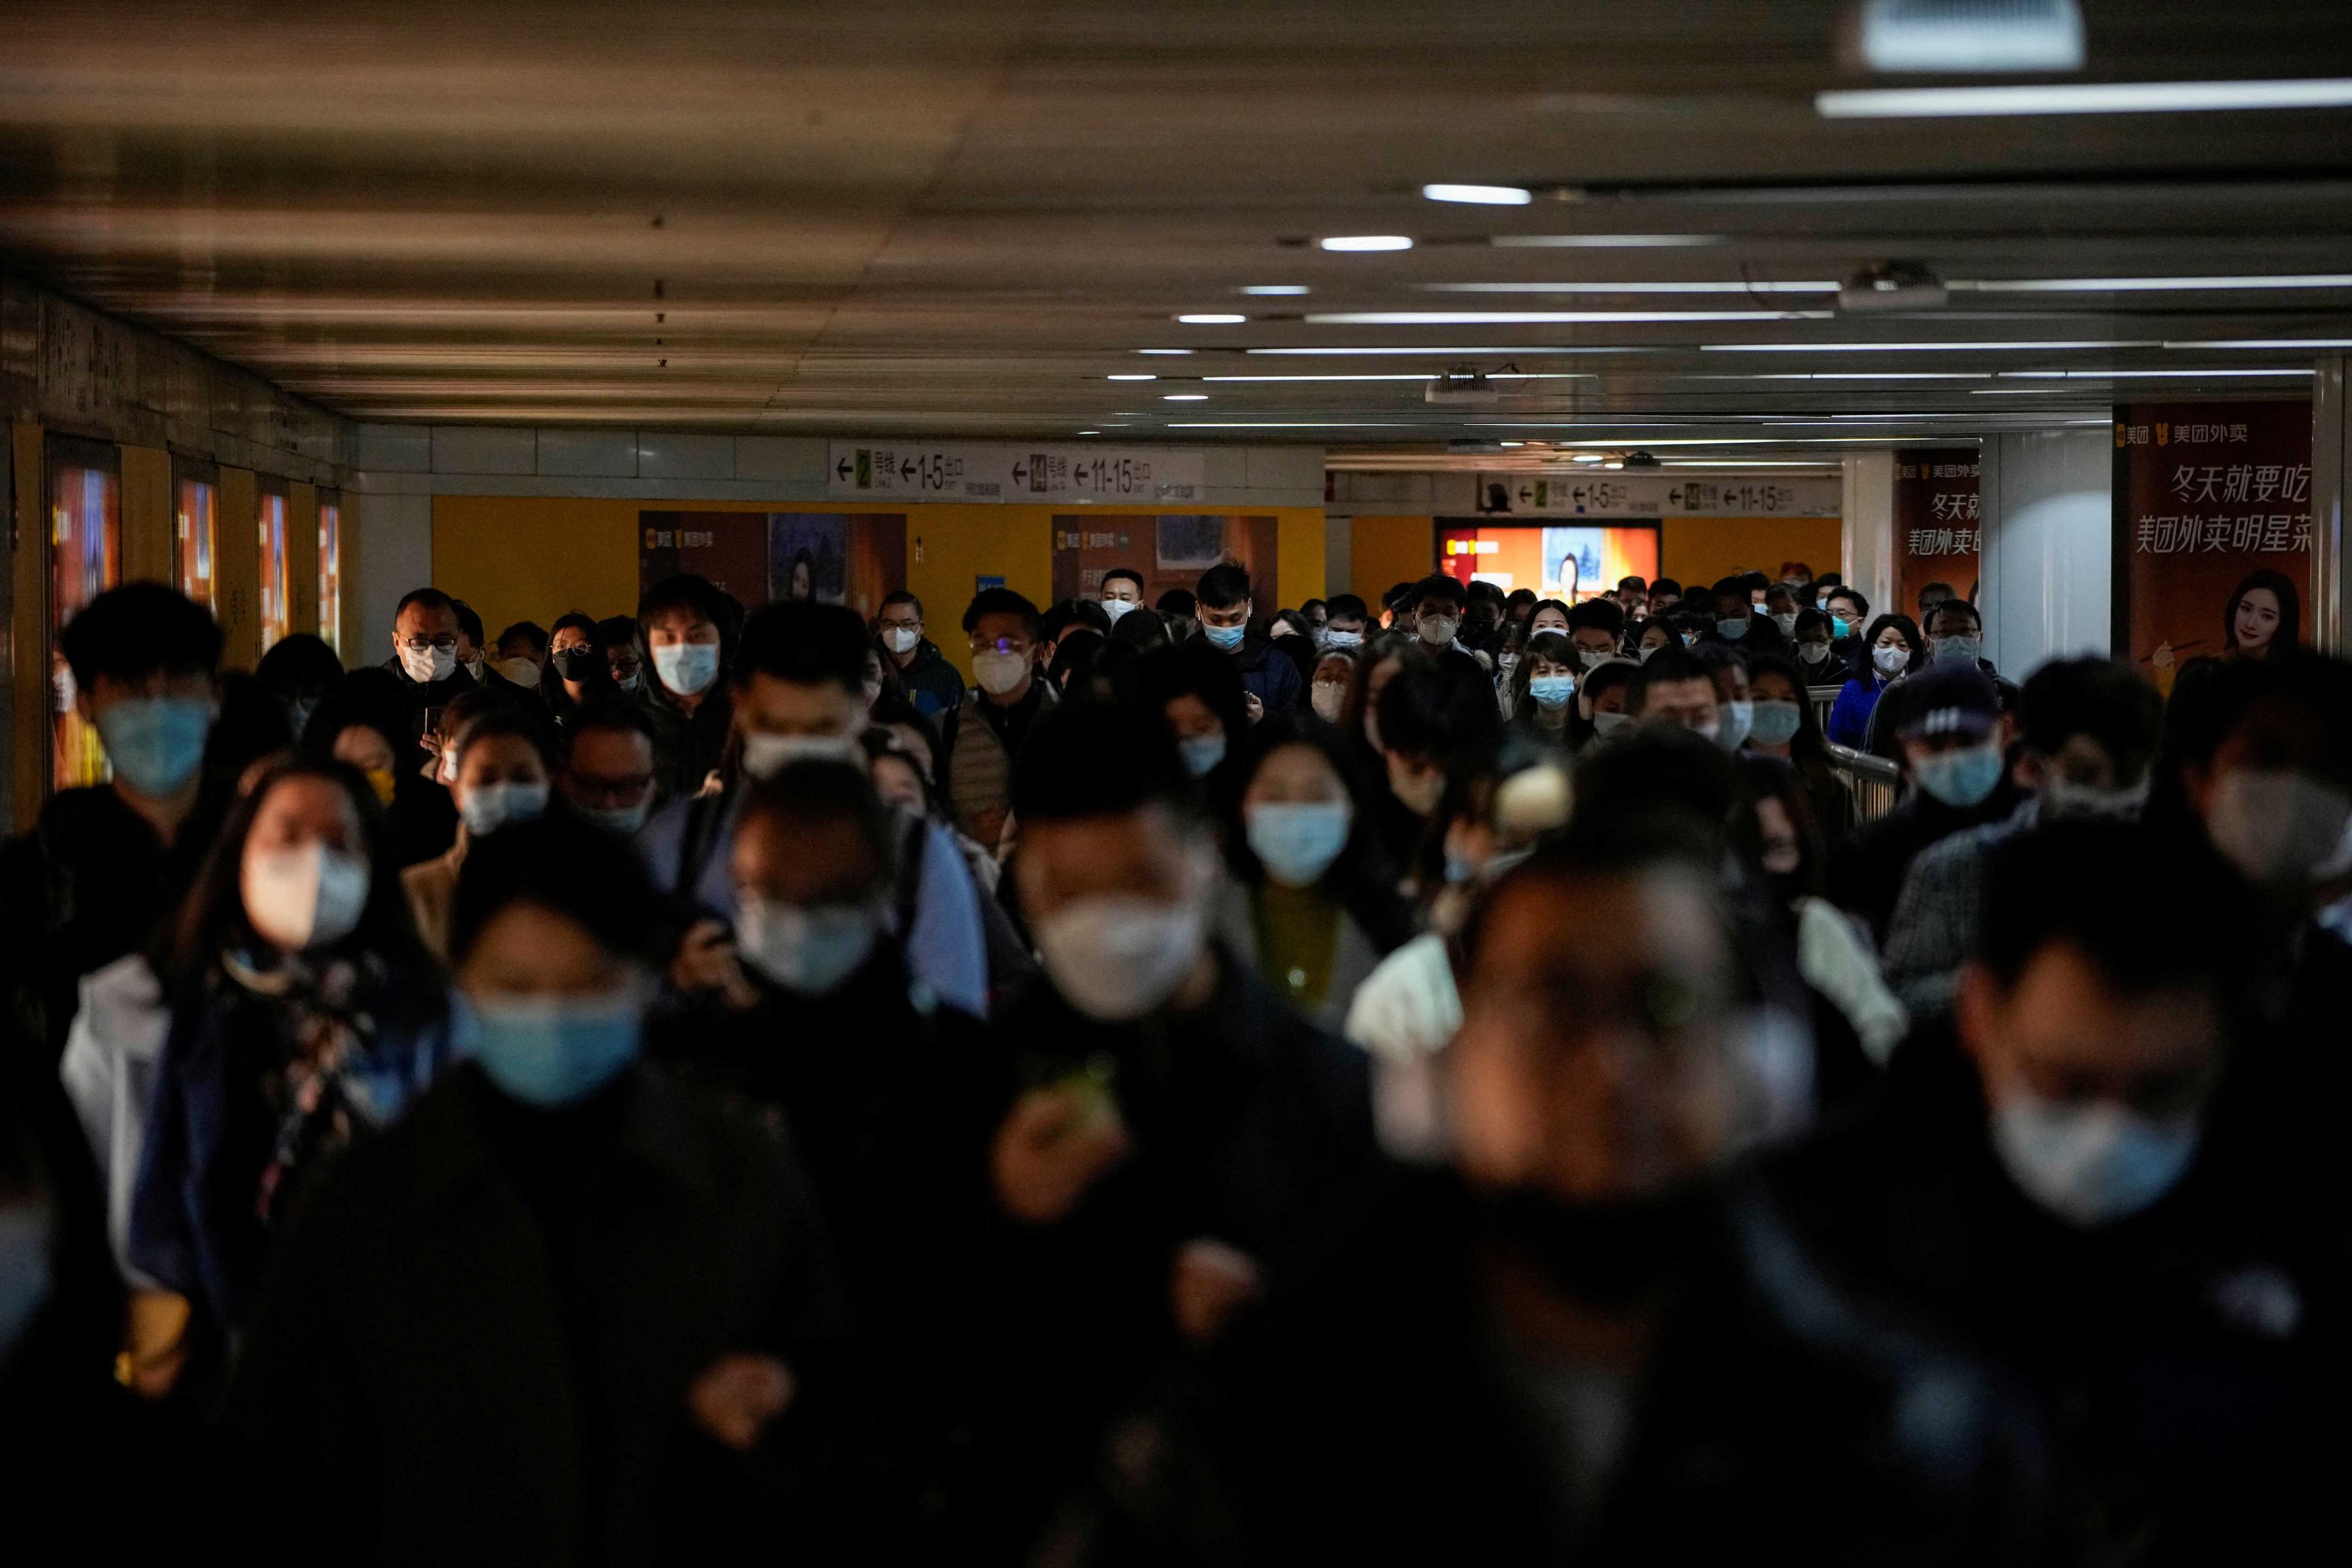 People wearing face masks walk in a subway station, as Covid-19 outbreaks continue in Shanghai, China, Dec 8. Photo: Reuters